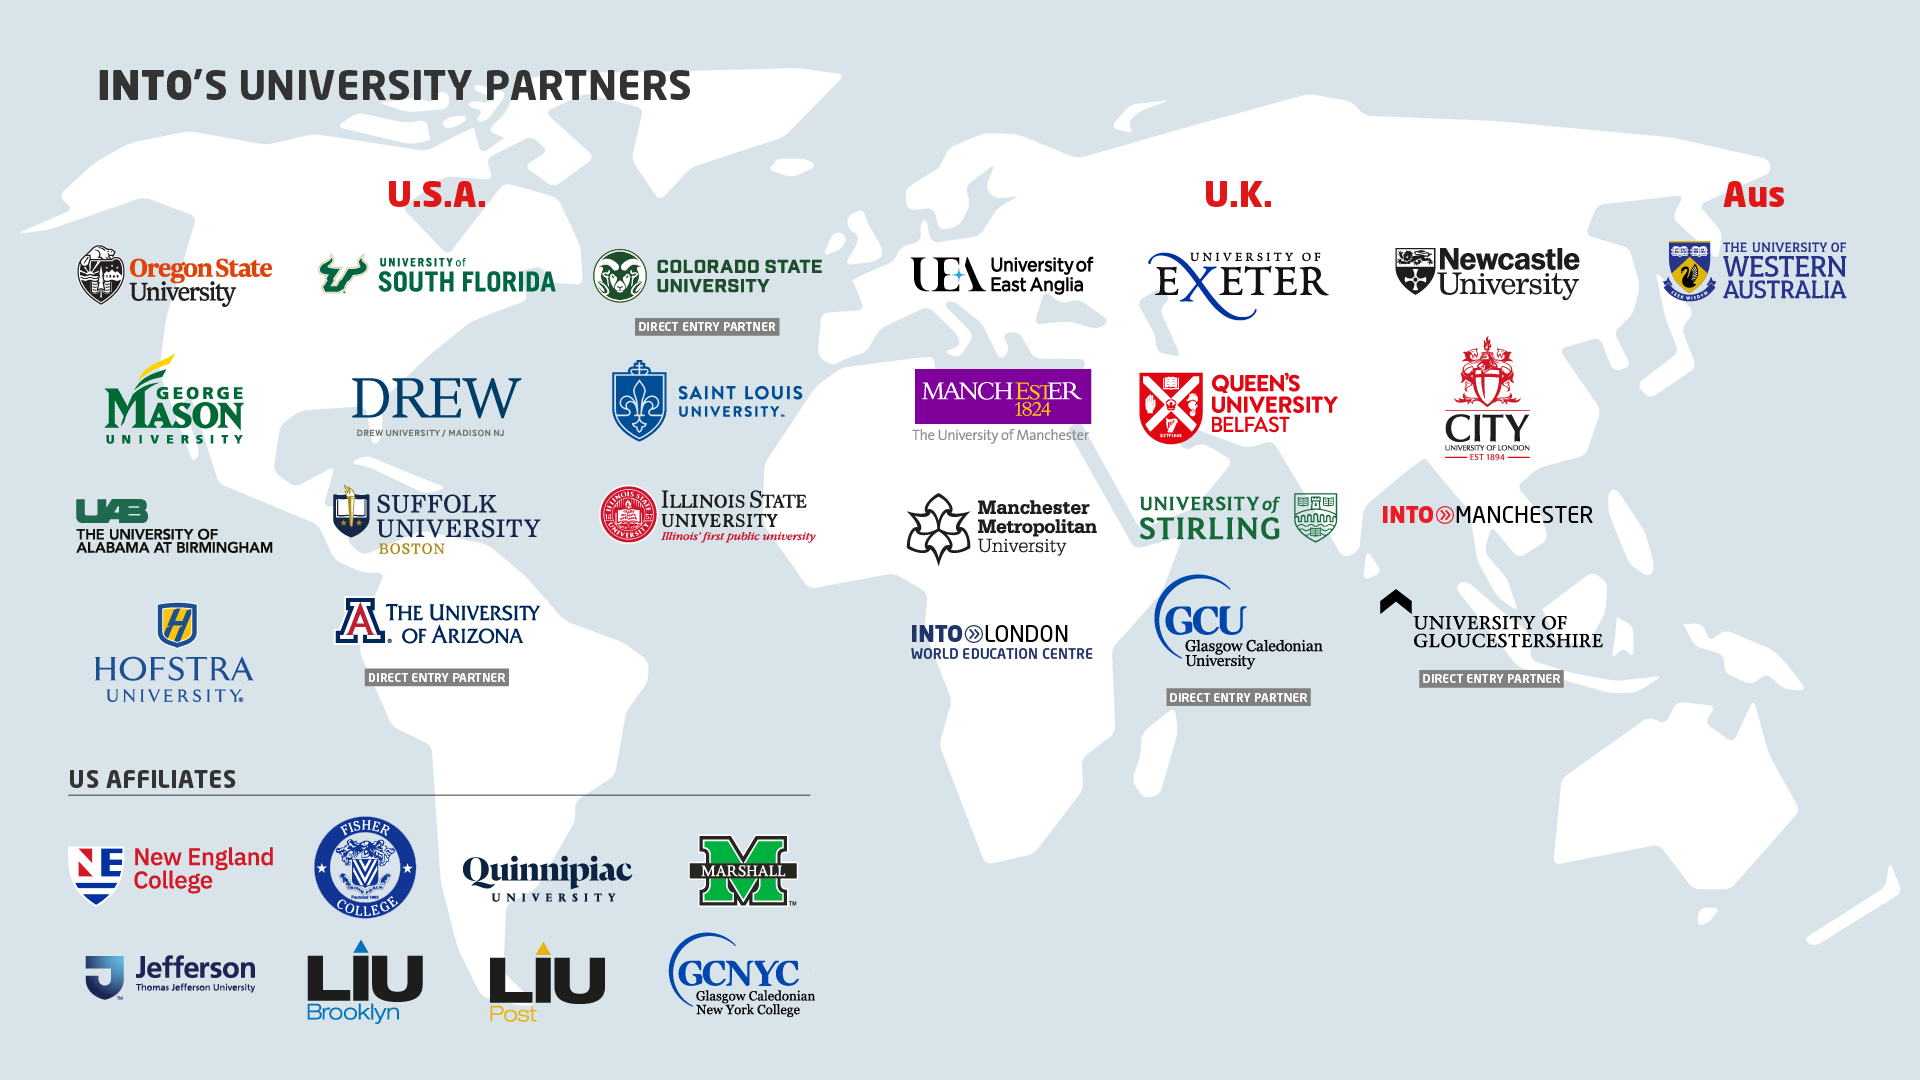 Map presenting logos of INTO’s leading partner universities partners, including 11 in the US, 9 in the UK, 1 in Australia, and 8 US affiliate universities.